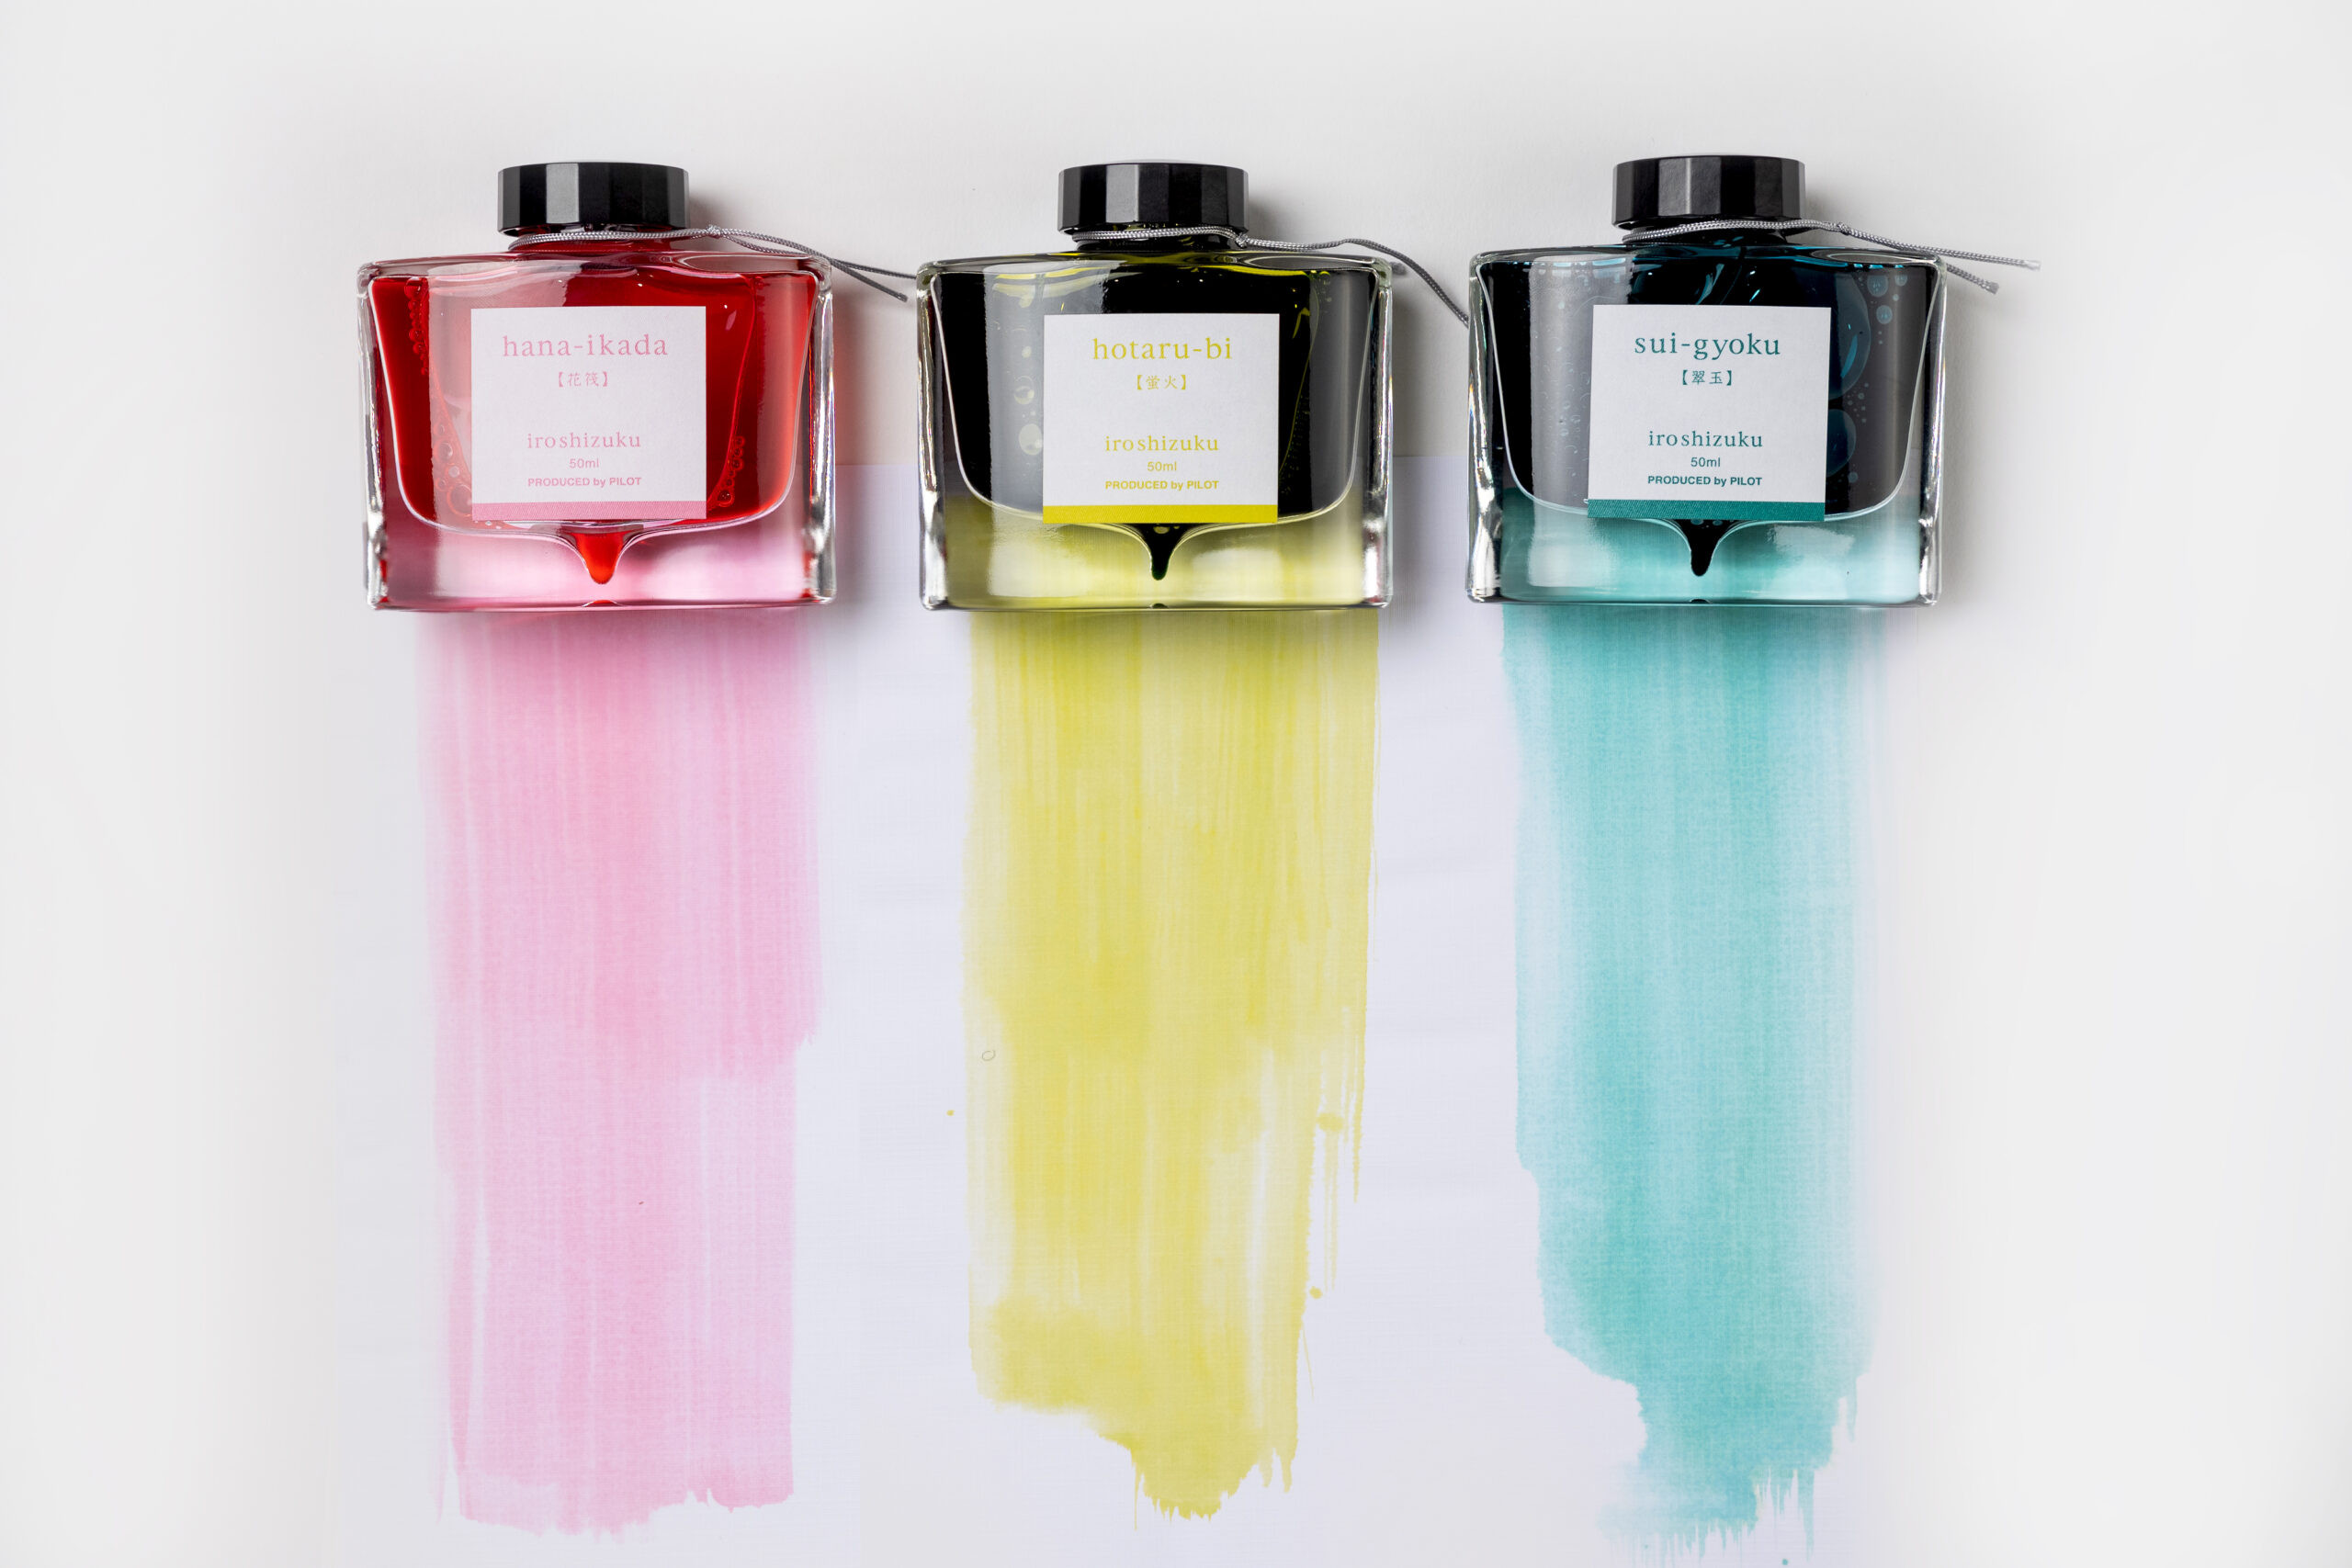 Three long swatches watch of Pilot iroshizuku ink, created using a broad paintbrush, sits under their corresponding glass bottles on a large piece of paper. The left bottle holds a pink ink, called hana-ikada, which translates to Cherry Blossom Petals in Japanese. The middle bottle is a yellow-green ink, called hotaru-bi, which translates to Firefly Glow. And the right bottle holds an ink called sui-gyoku, which translates to Emerald Green